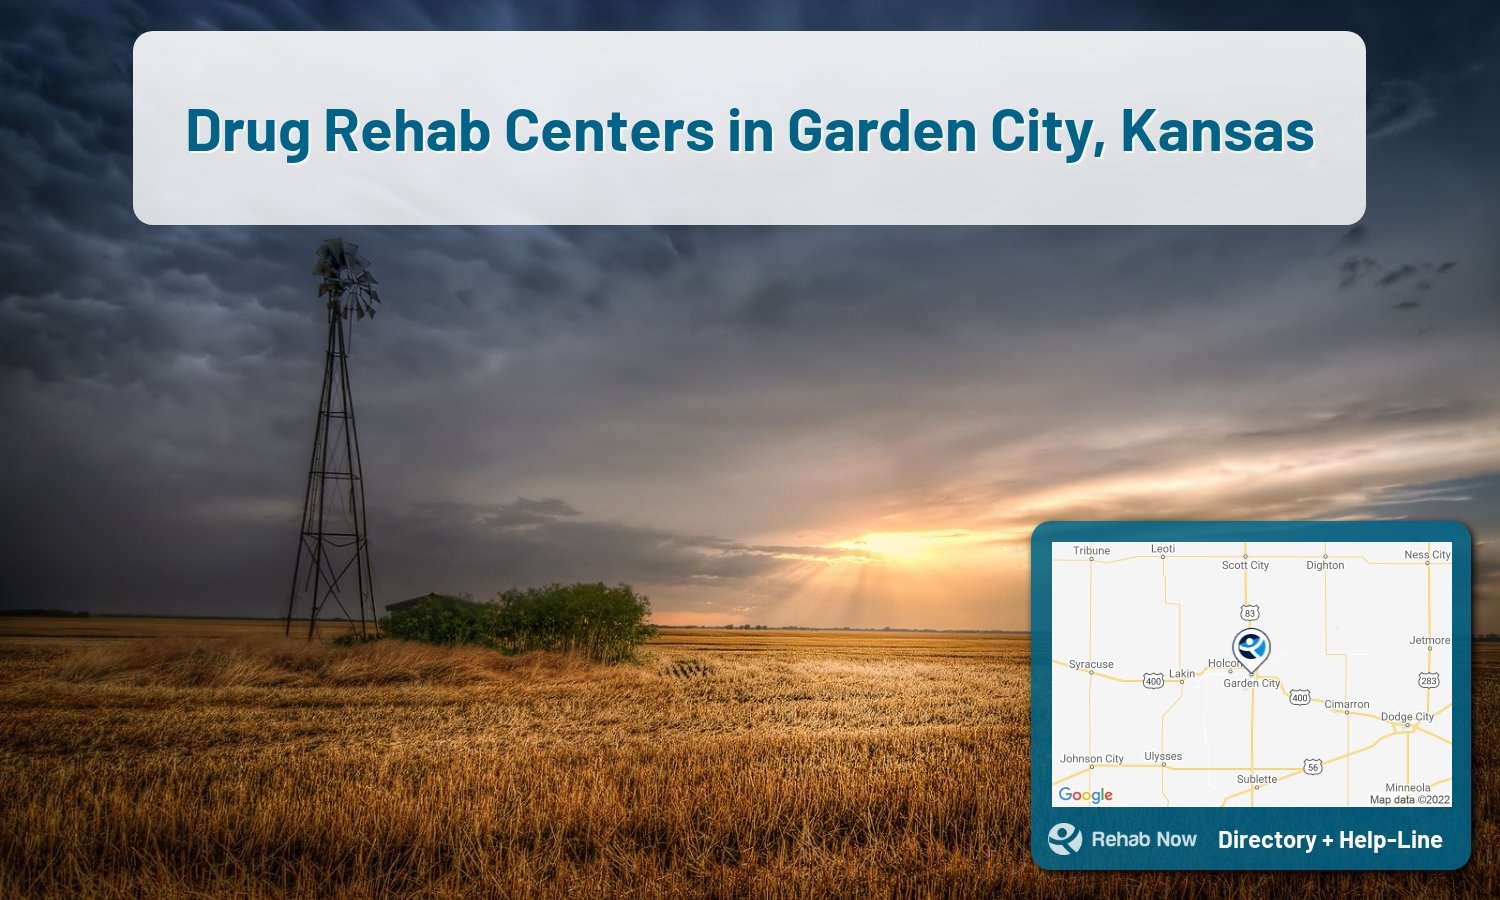 Garden City, KS Treatment Centers. Find drug rehab in Garden City, Kansas, or detox and treatment programs. Get the right help now!